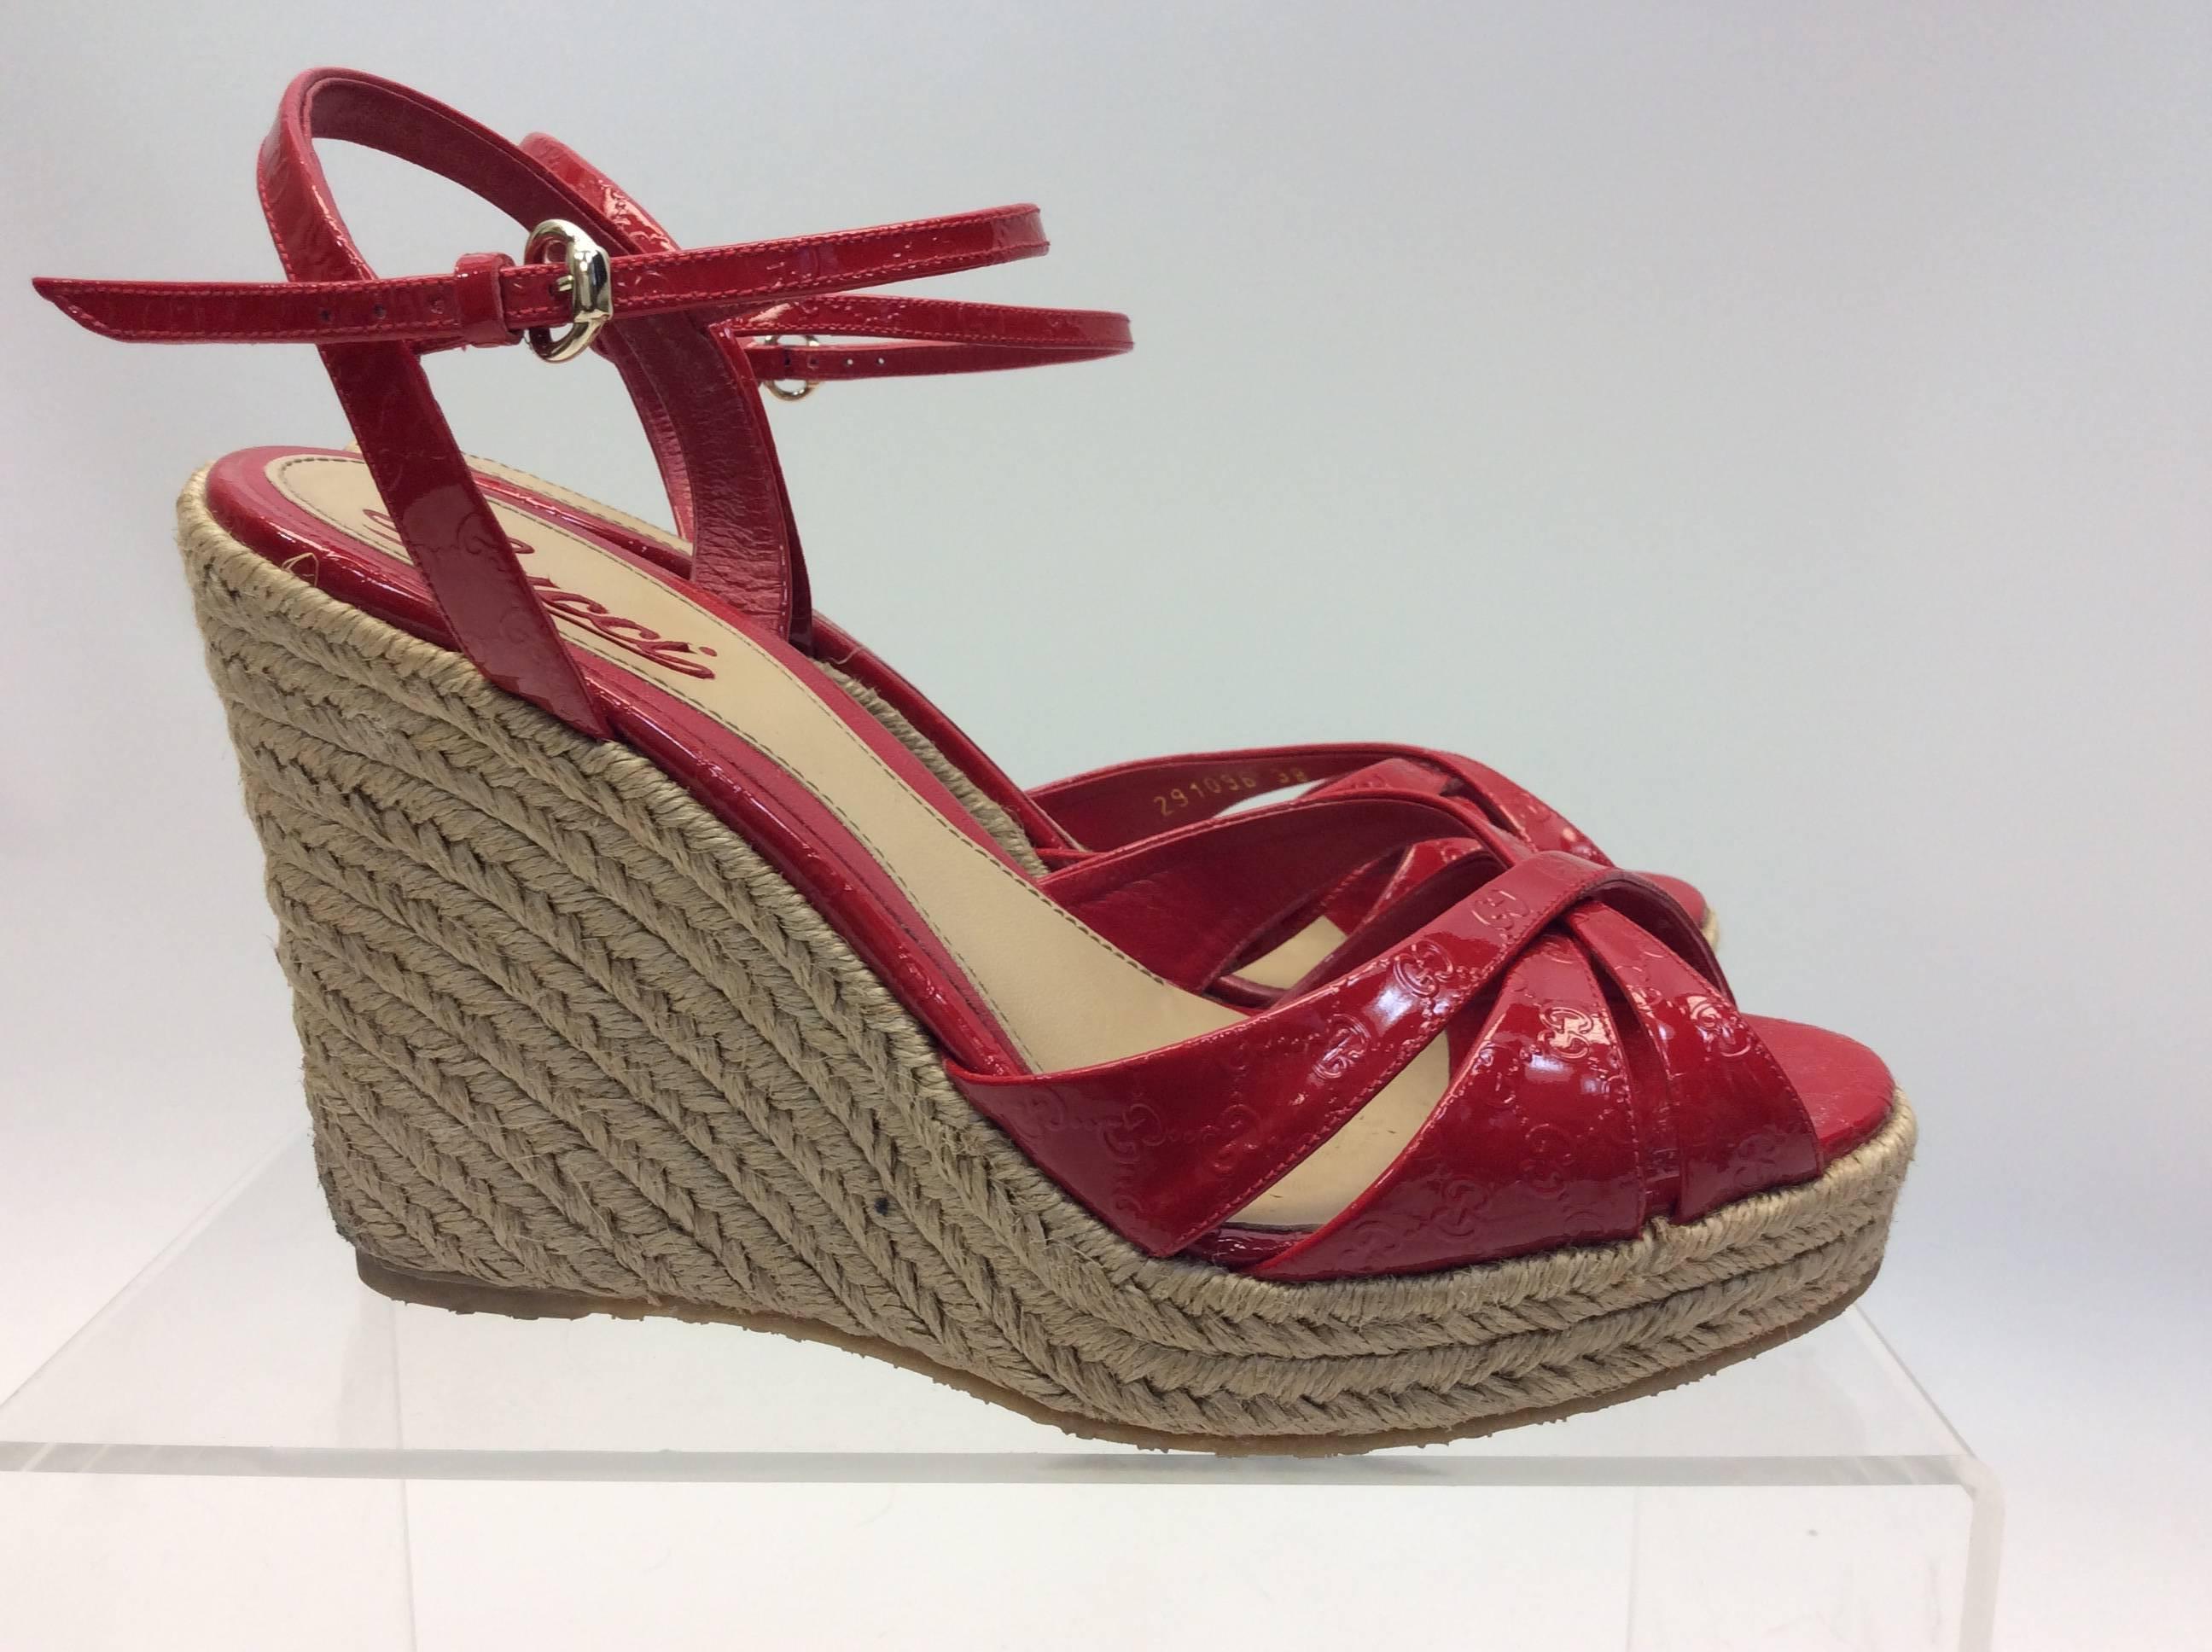 Gucci Red Patent Leather Wedge In Excellent Condition For Sale In Narberth, PA